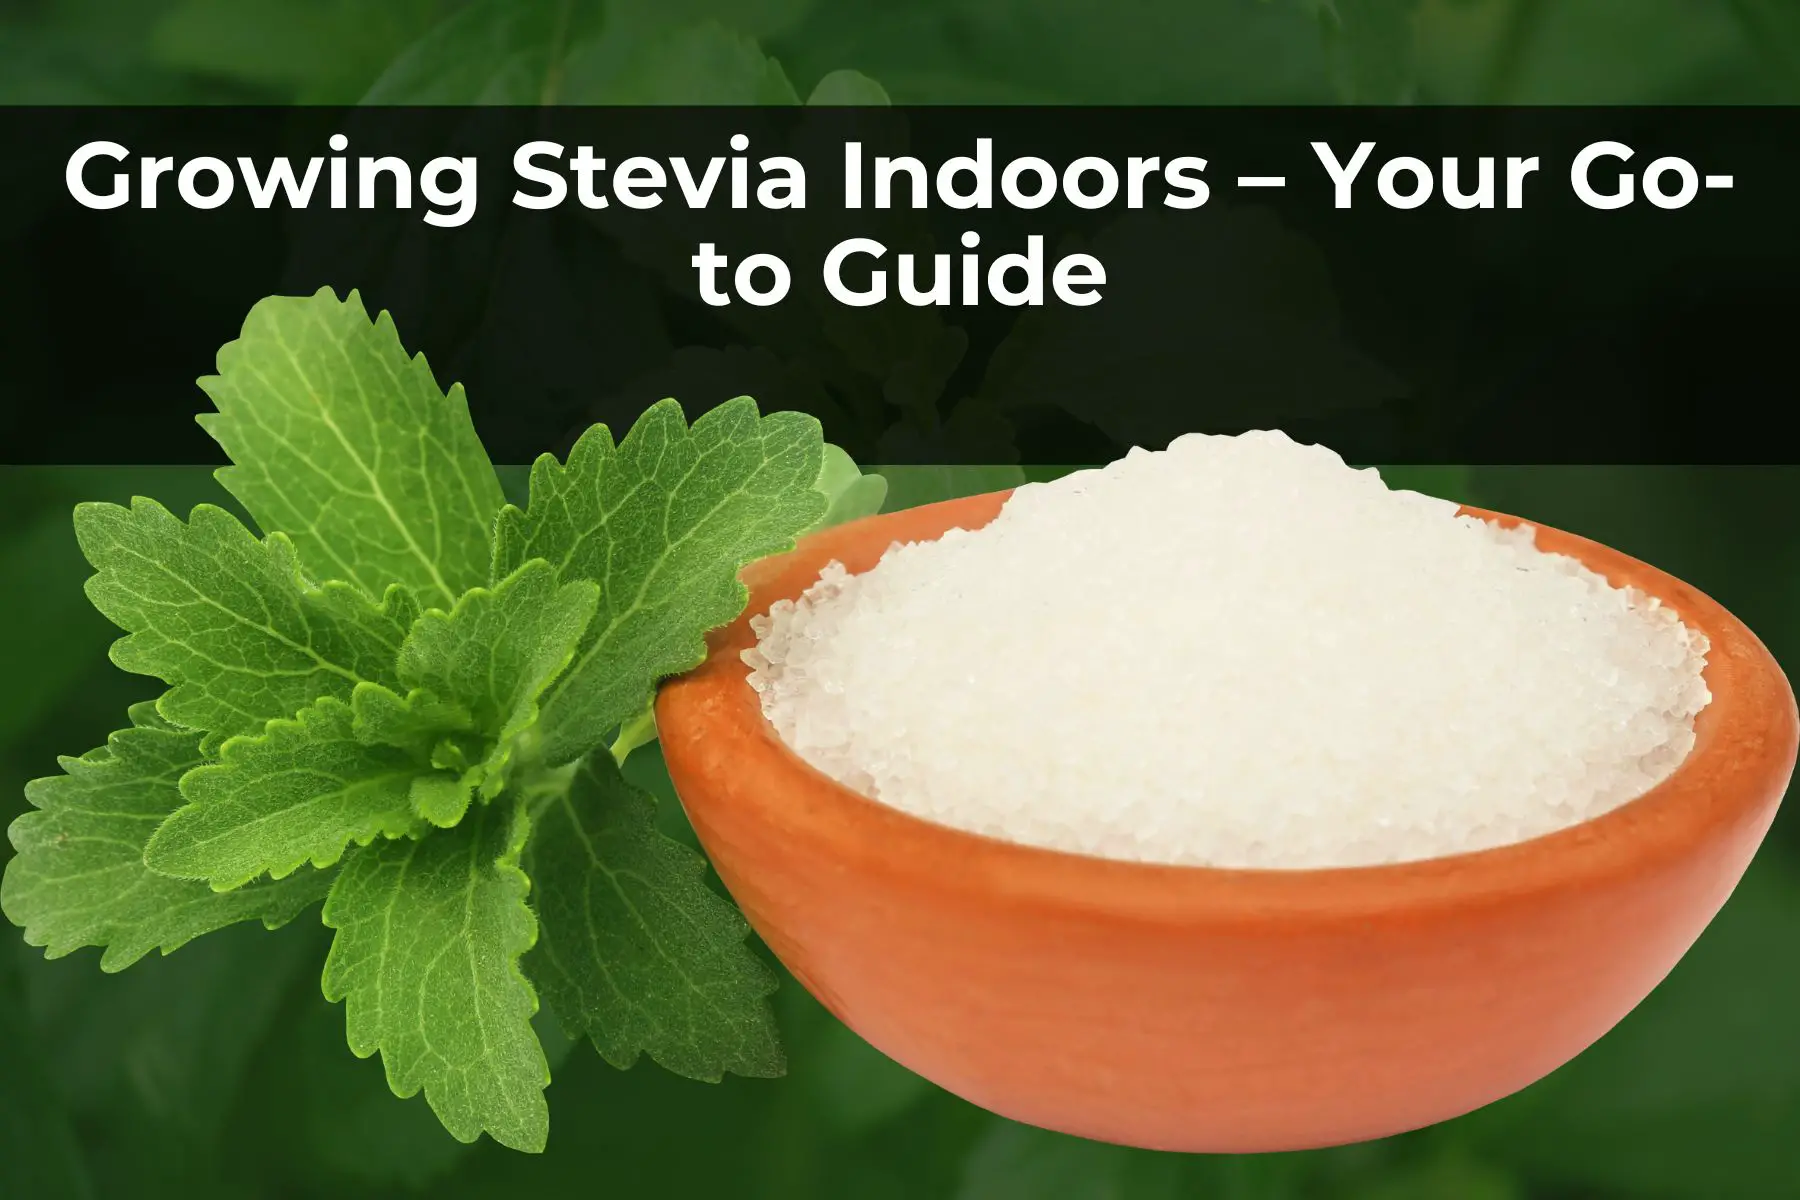 Growing stevia indoors - your go to guide